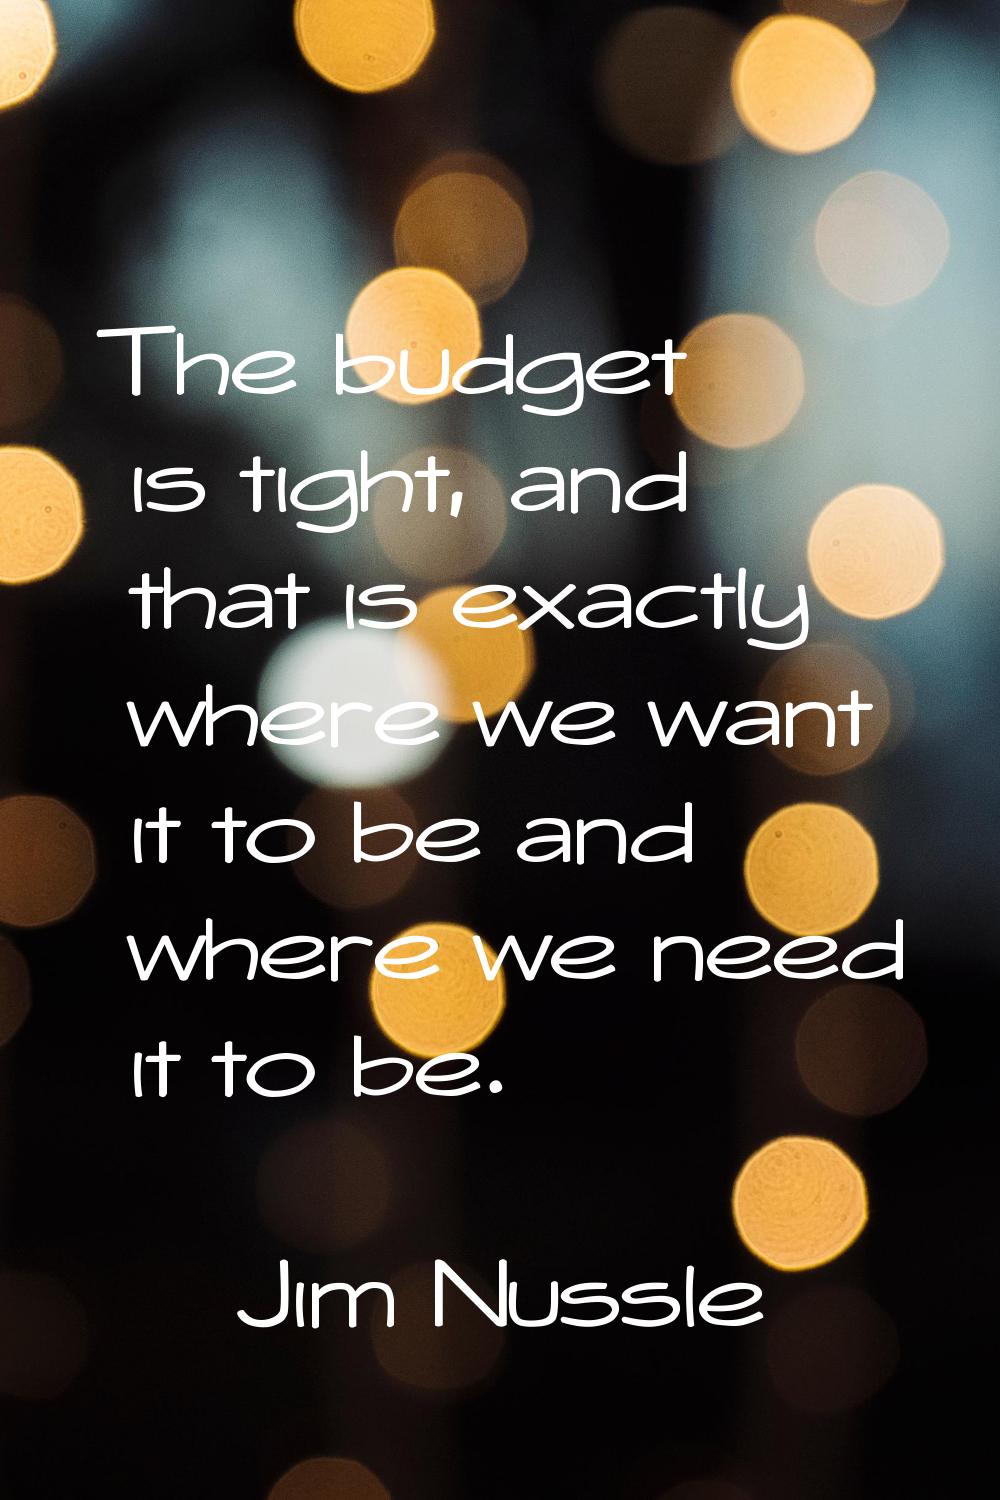 The budget is tight, and that is exactly where we want it to be and where we need it to be.